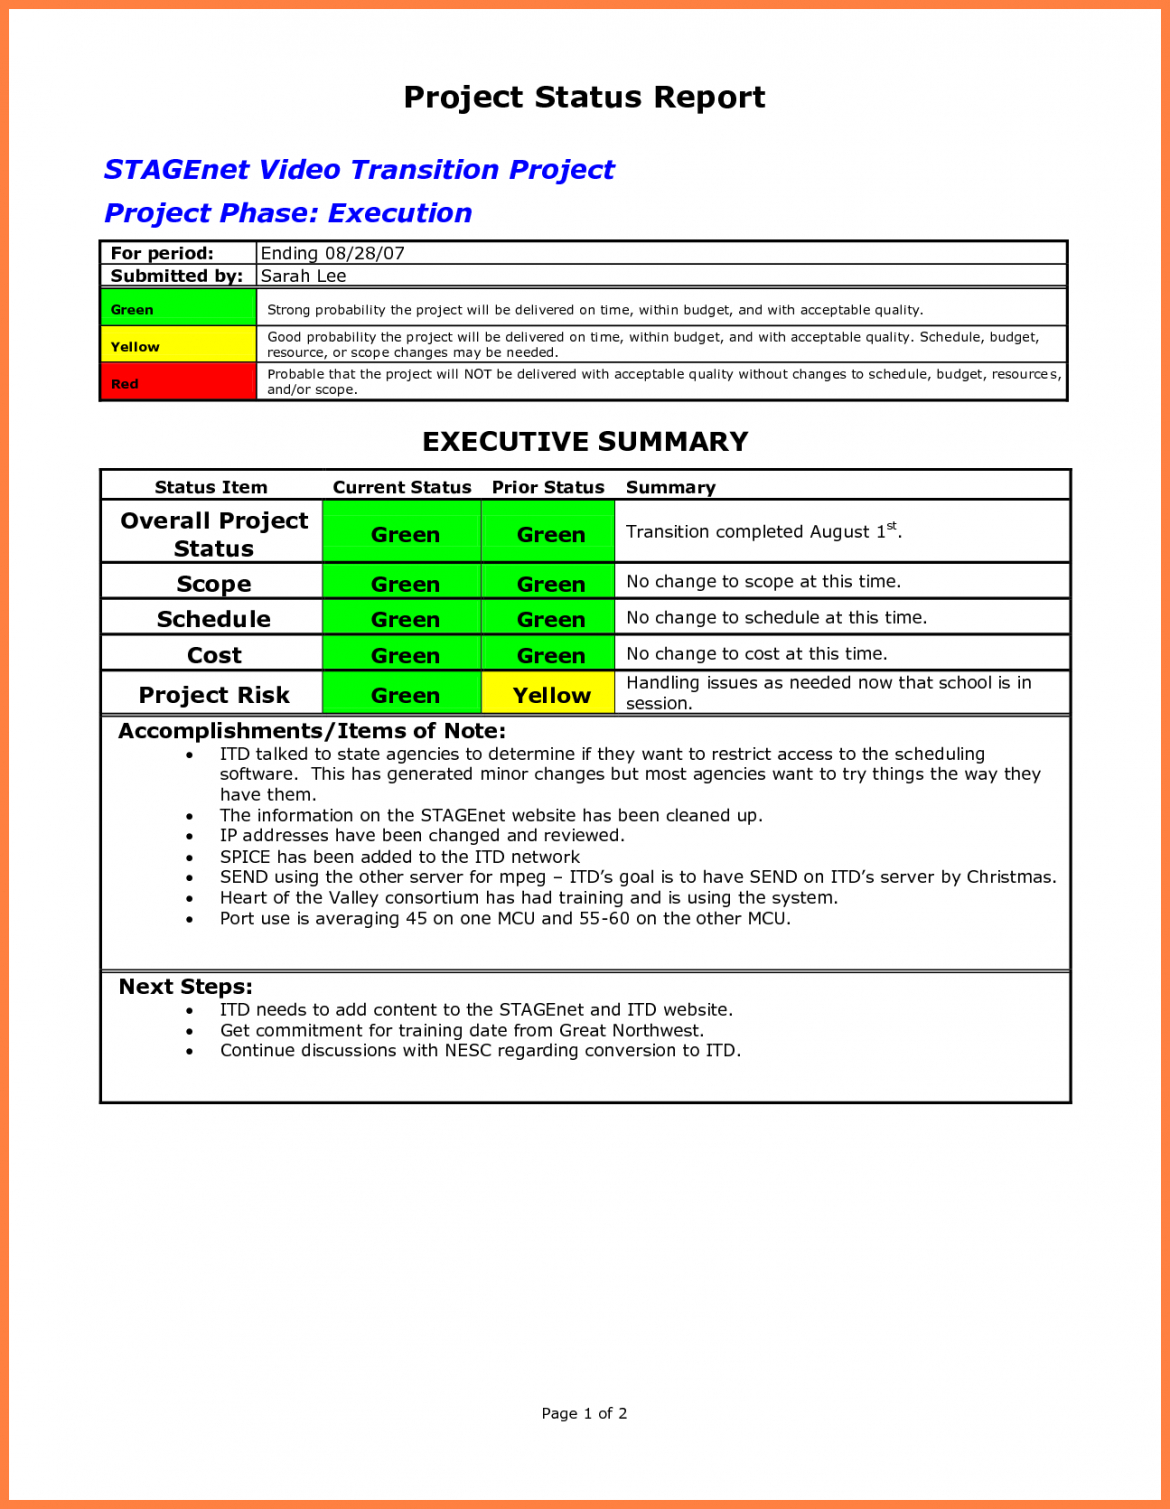 Project Status Report Template Excel – Teplates For Every Day Inside Executive Summary Project Status Report Template